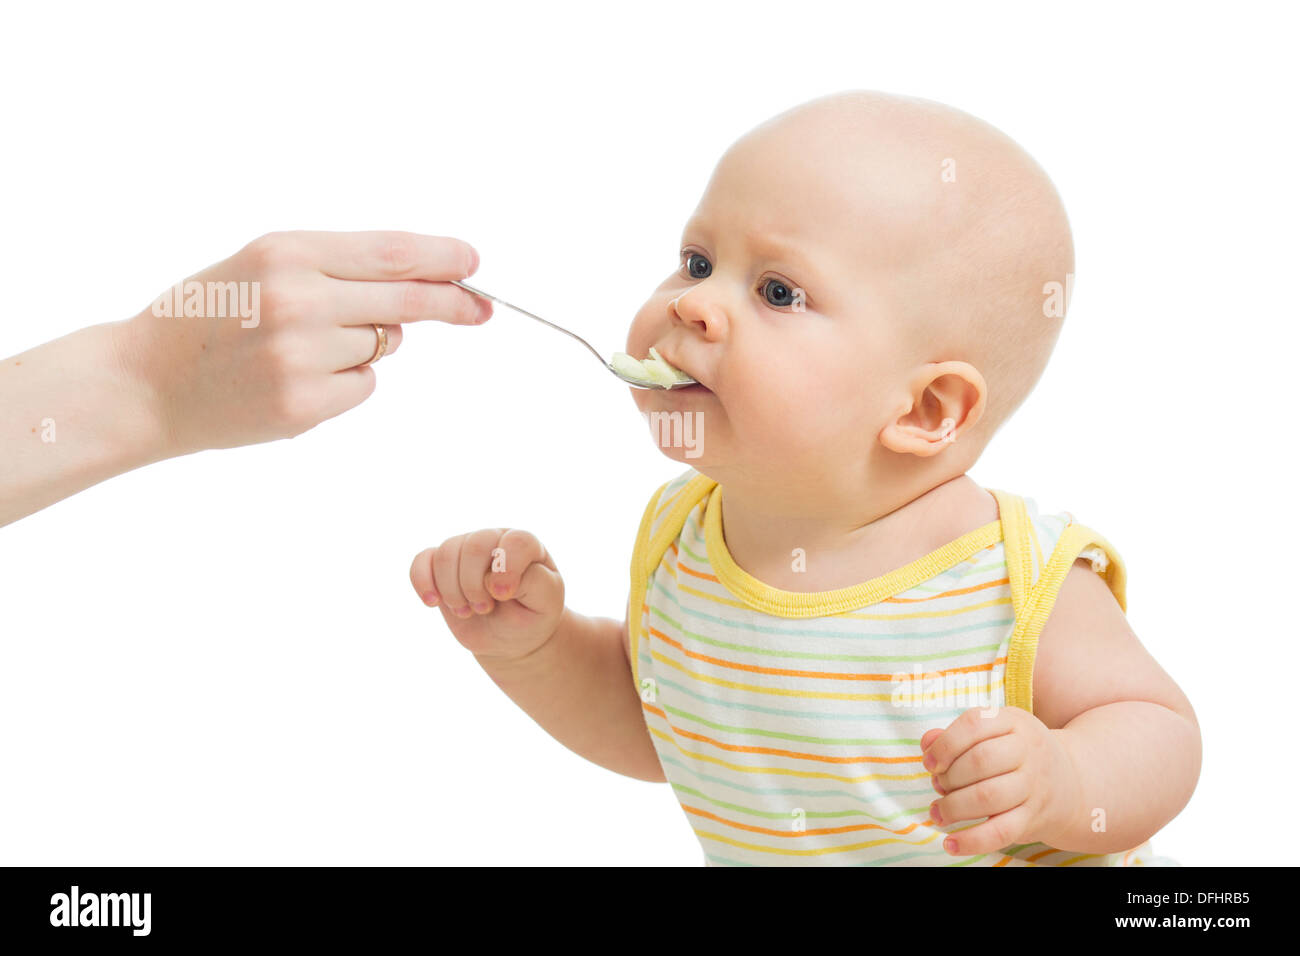 https://c8.alamy.com/comp/DFHRB5/mothers-hand-feeding-baby-with-a-spoon-DFHRB5.jpg